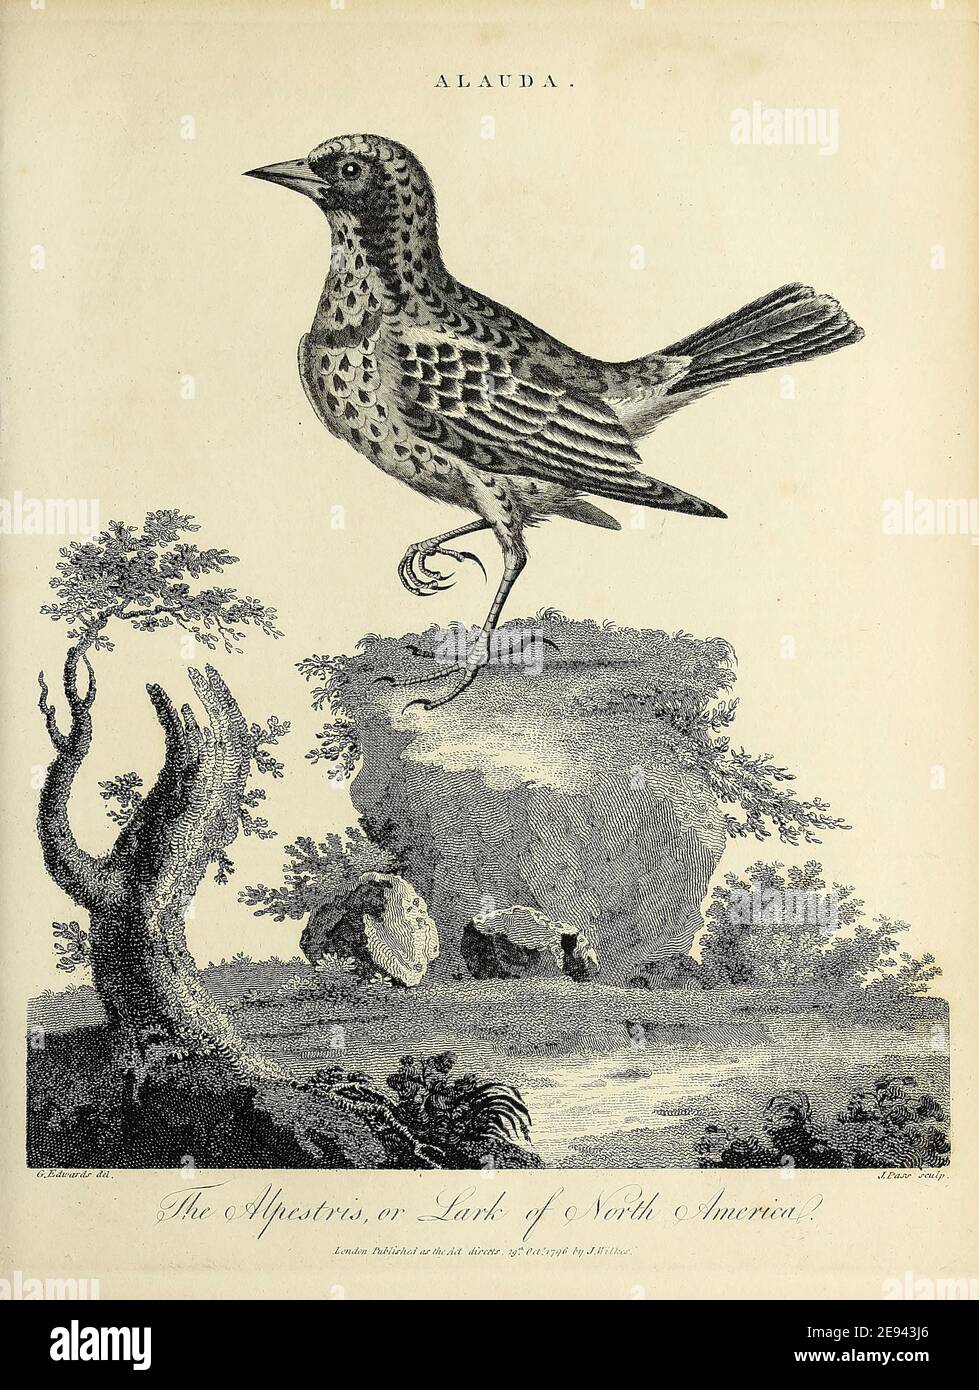 Alauda is a genus of larks found across much of Europe, Asia and in the mountains of north Africa, Copperplate engraving From the Encyclopaedia Londinensis or, Universal dictionary of arts, sciences, and literature; Volume I;  Edited by Wilkes, John. Published in London in 1810 Stock Photo